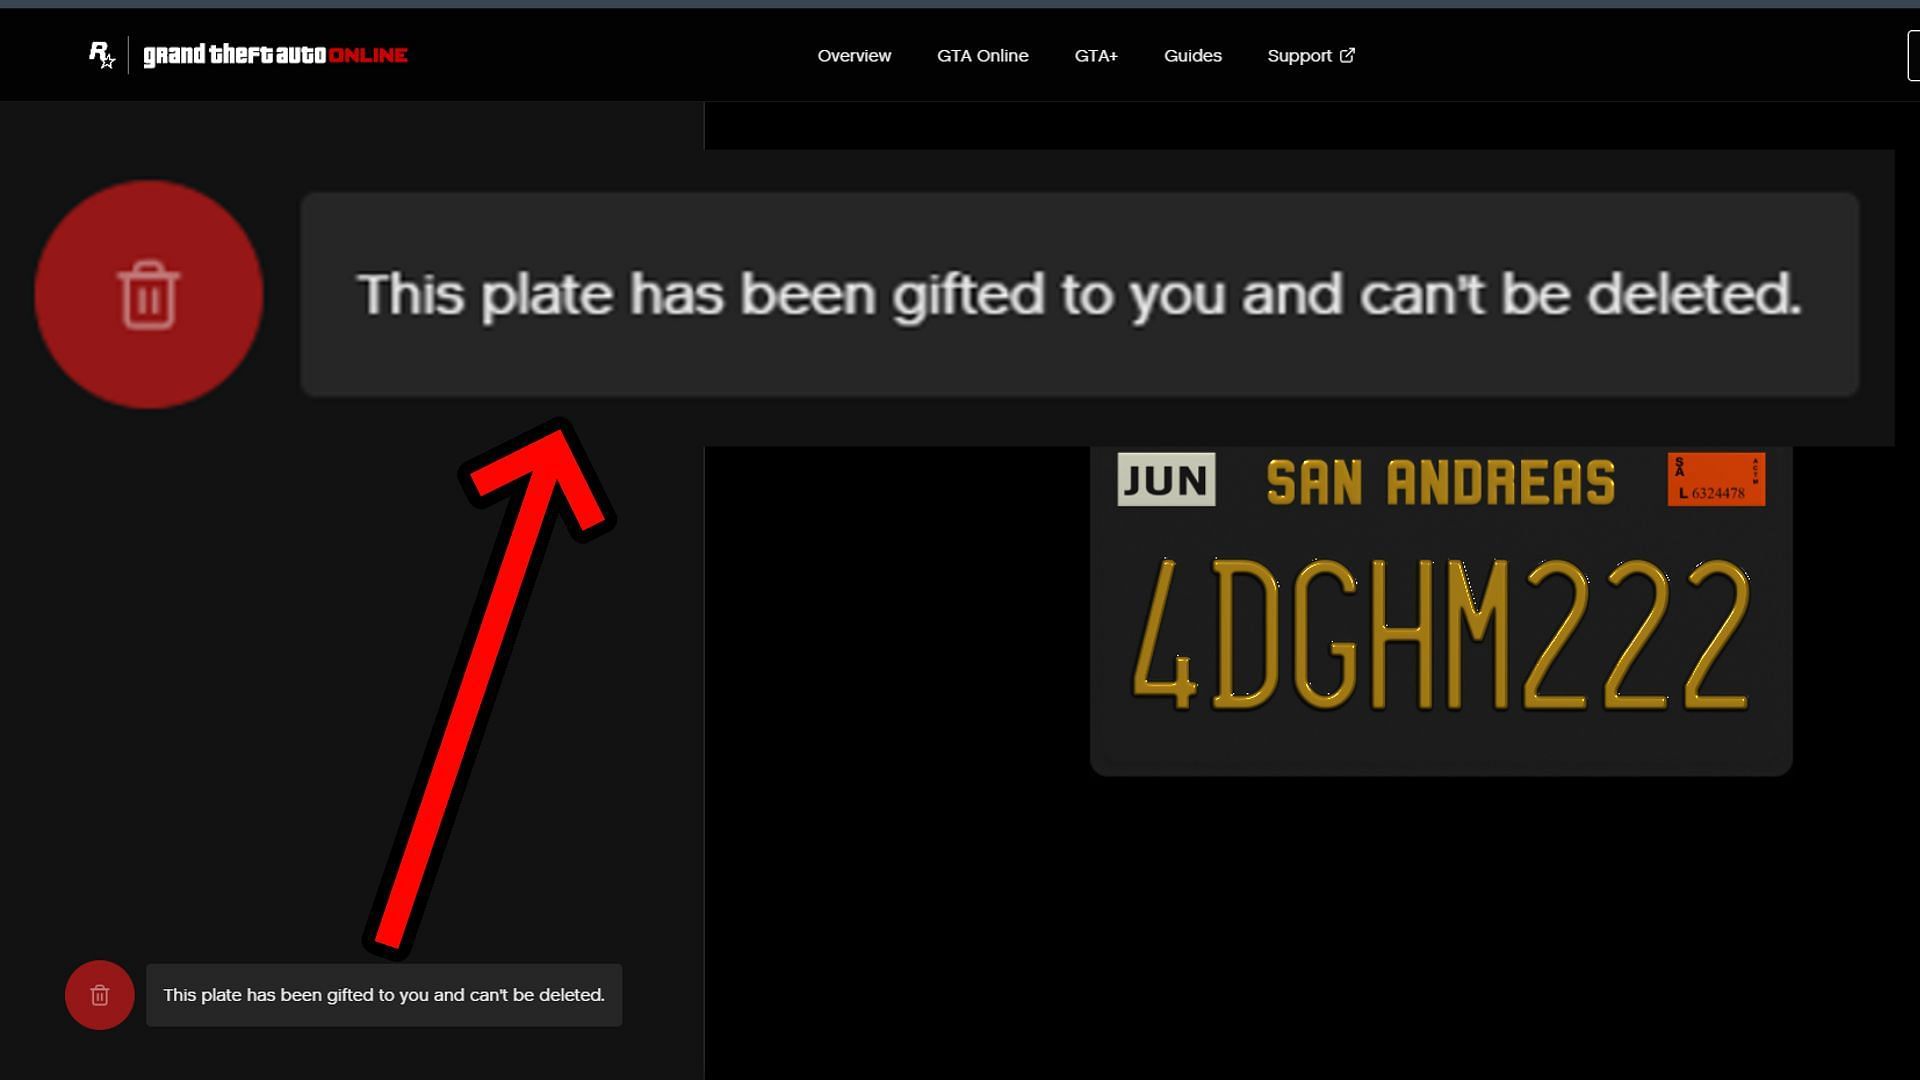 Some plates cannot be deleted (Image via Rockstar Games)